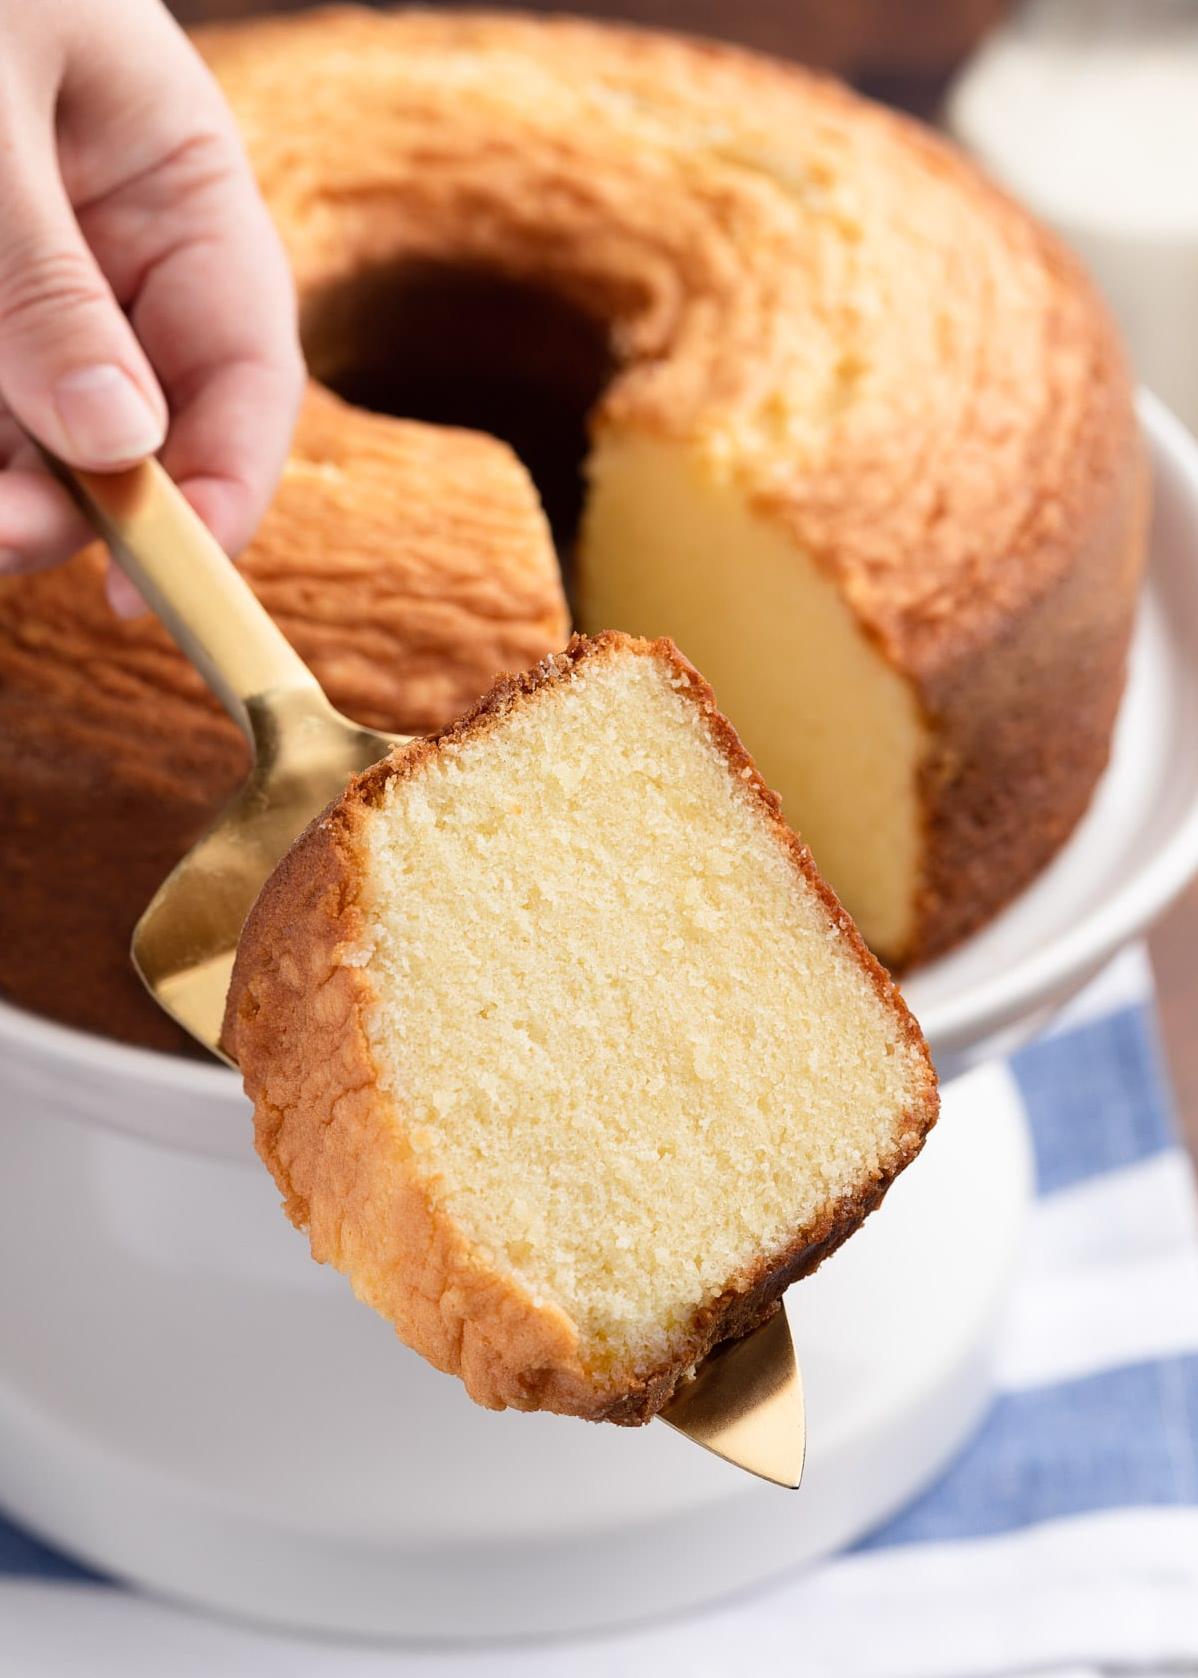  Enjoy a slice of this irresistible pound cake with your morning coffee or as a dessert with ice cream.